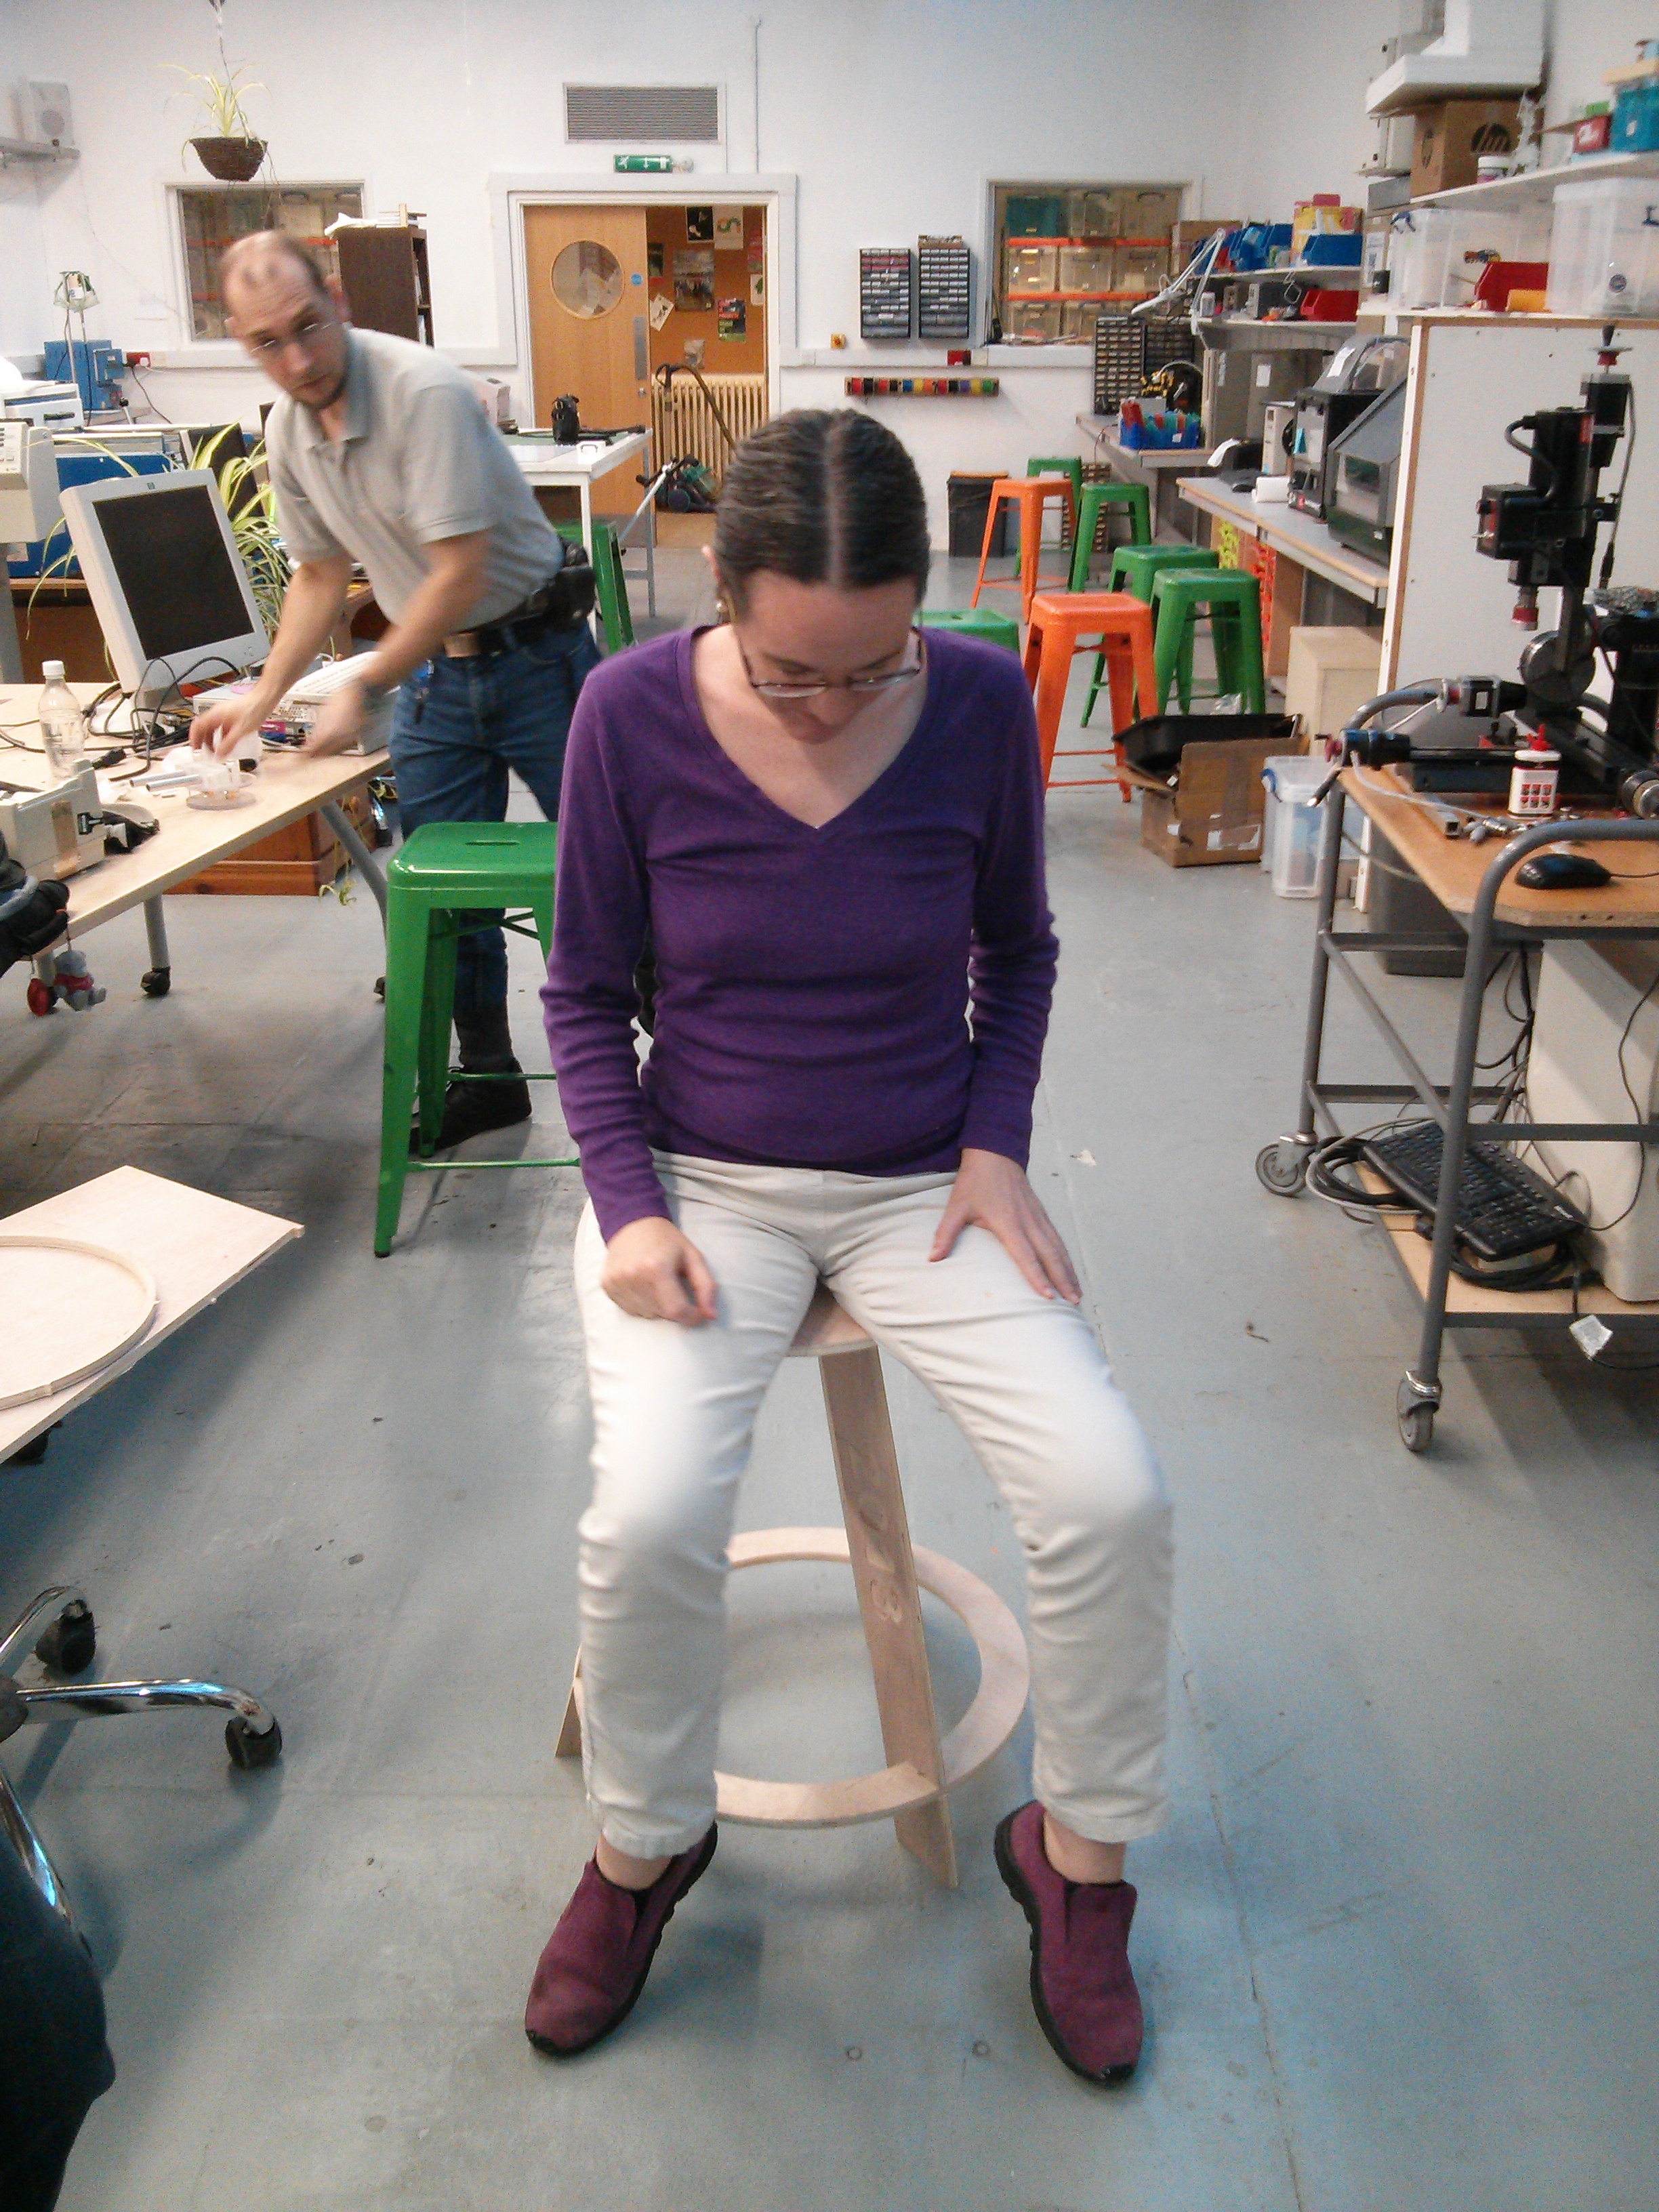 Anne Harrison volunteering to try the wobbly stool of doom